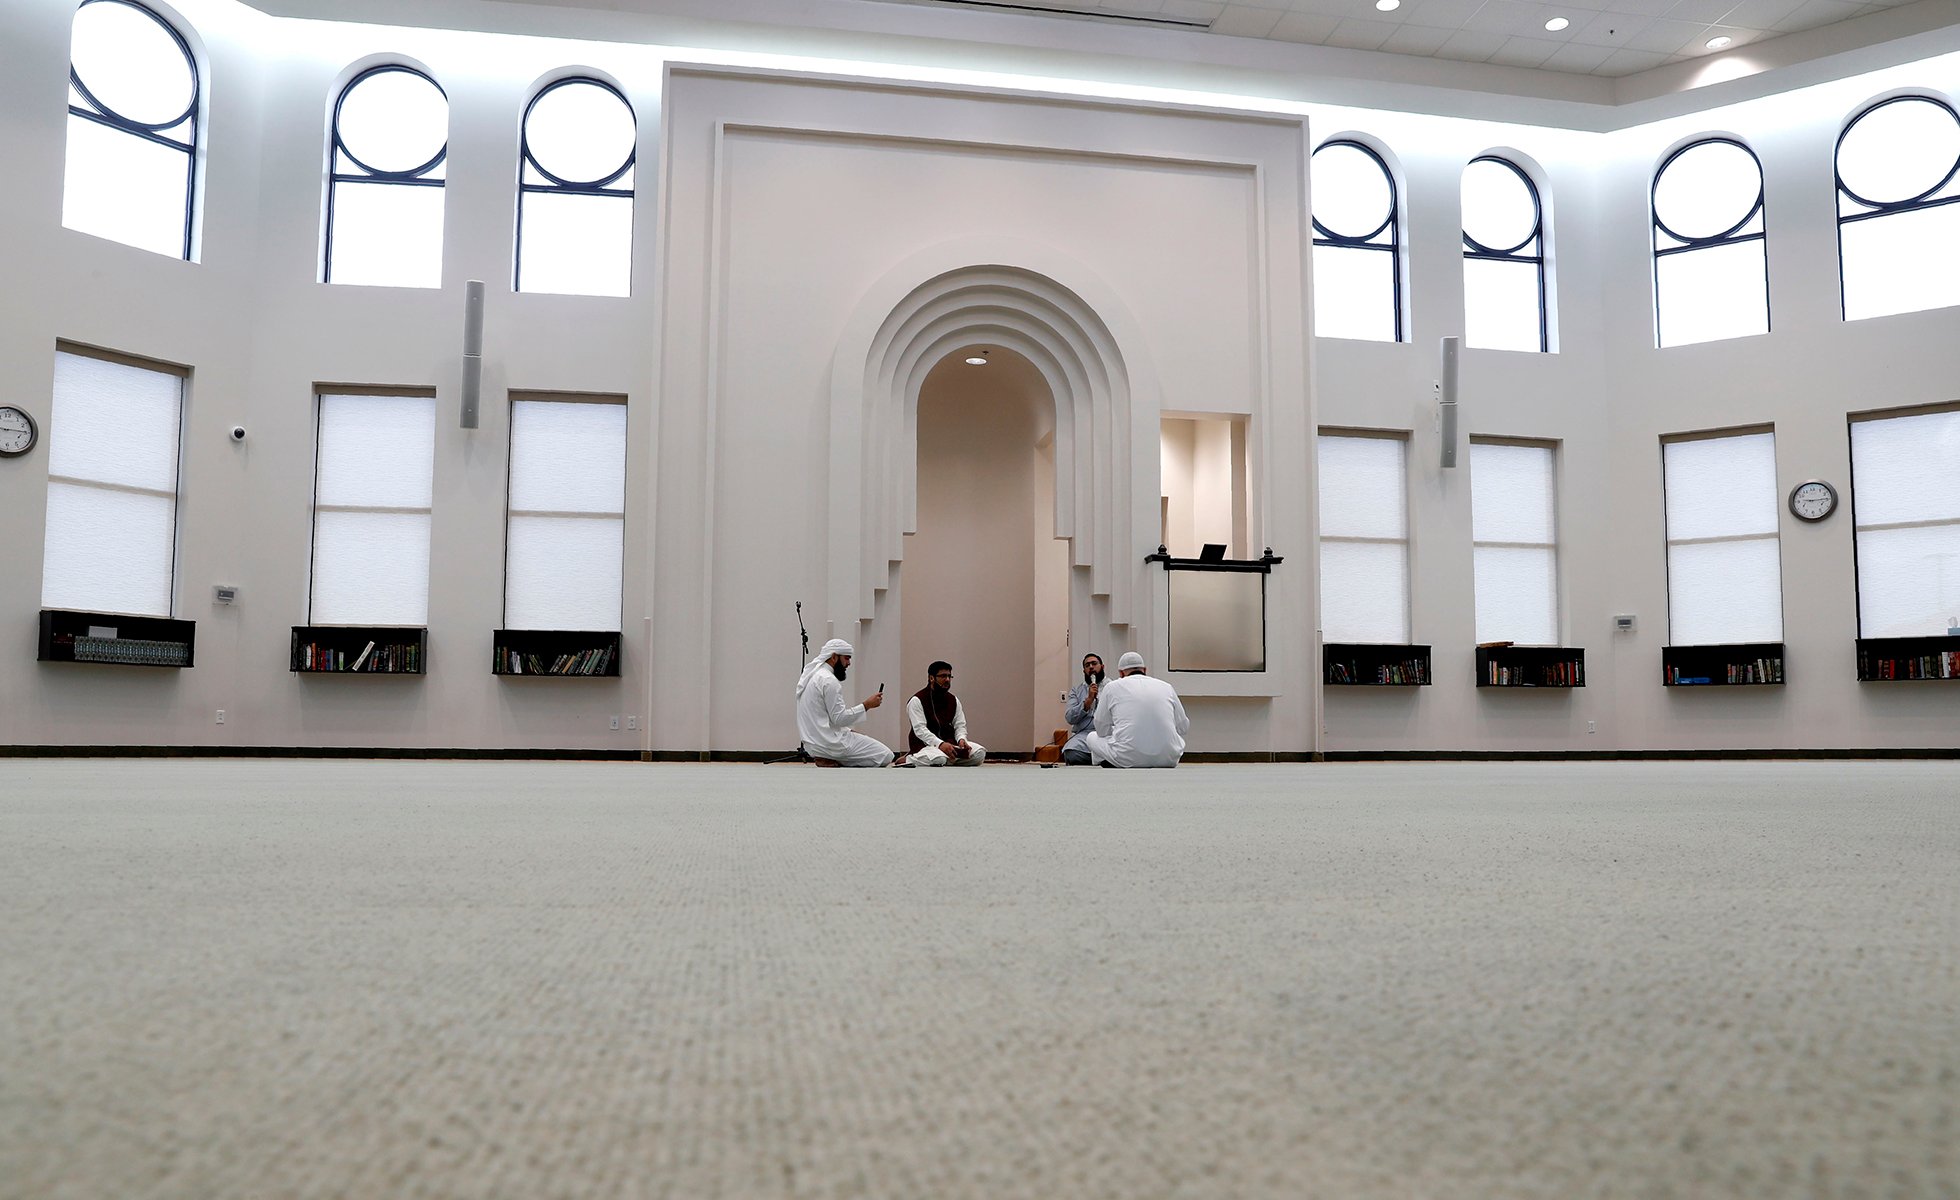 Amid concerns of the spread of COVID-19, a small group prays inside an empty mosque before an Eid al-Fitr celebration in Plano, Texas, Sunday, May 24, 2020. (AP Photo/LM Otero)